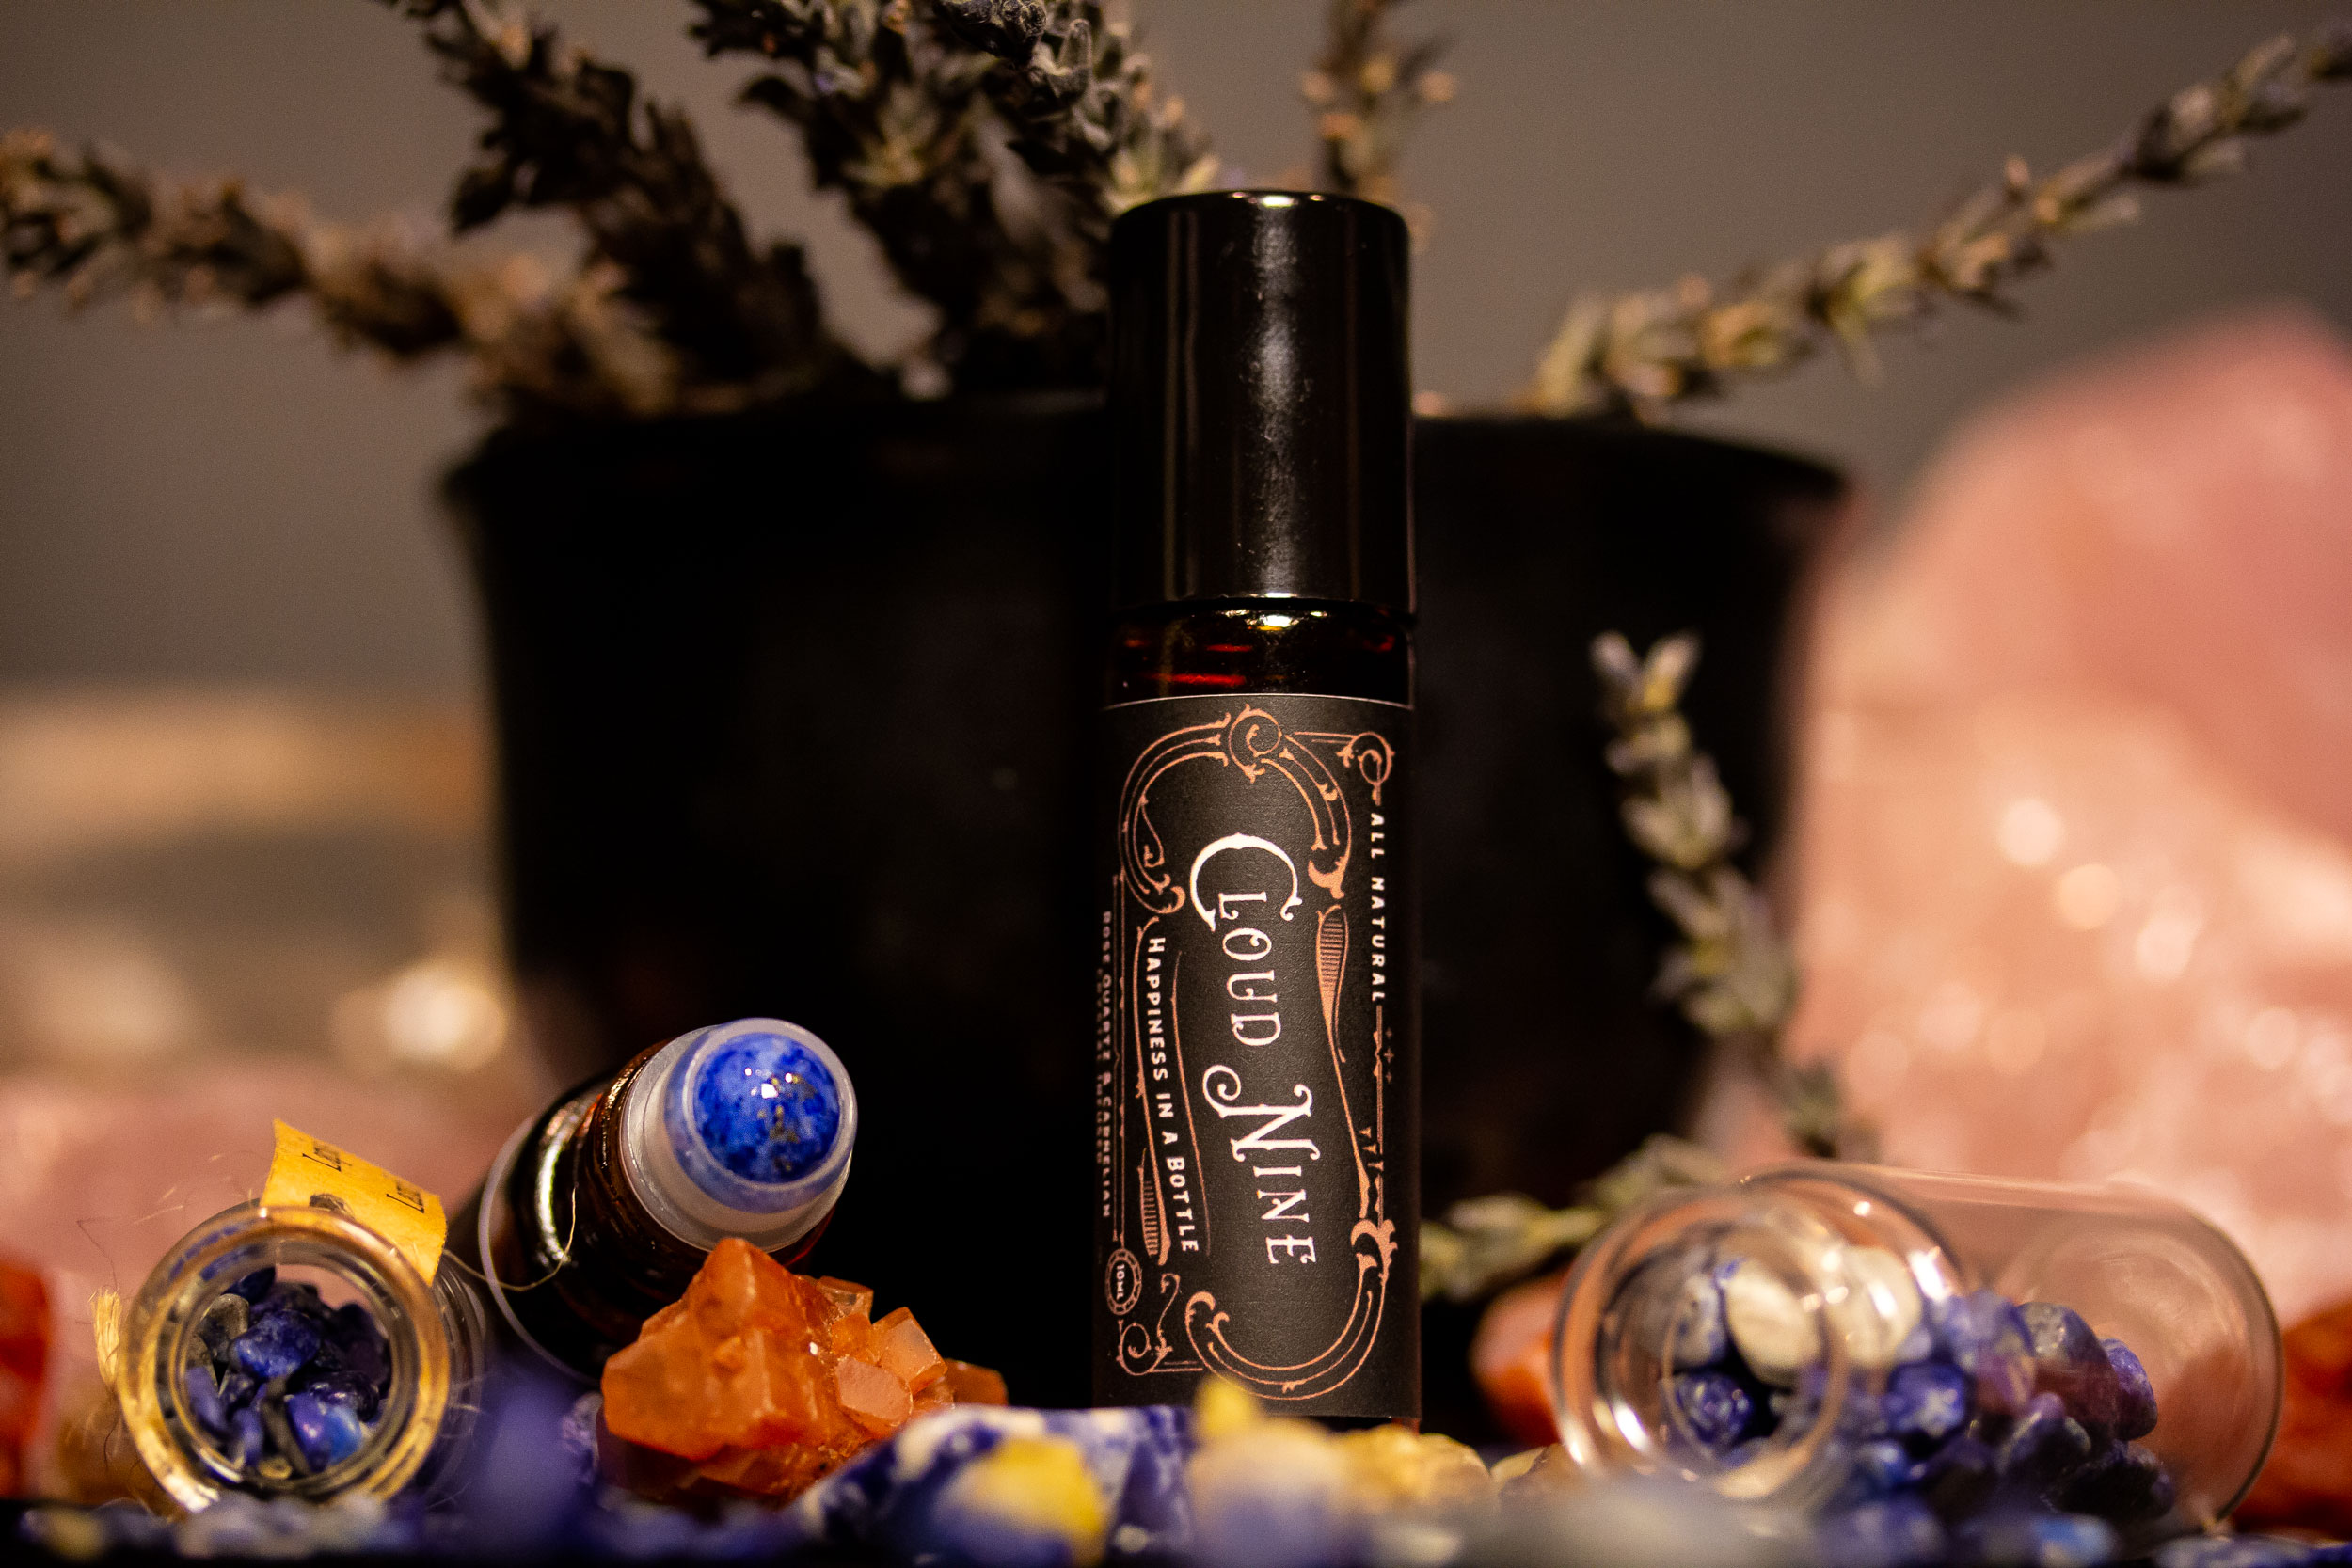 Essential Oil: Frankincense - Cloud 9 Naturally